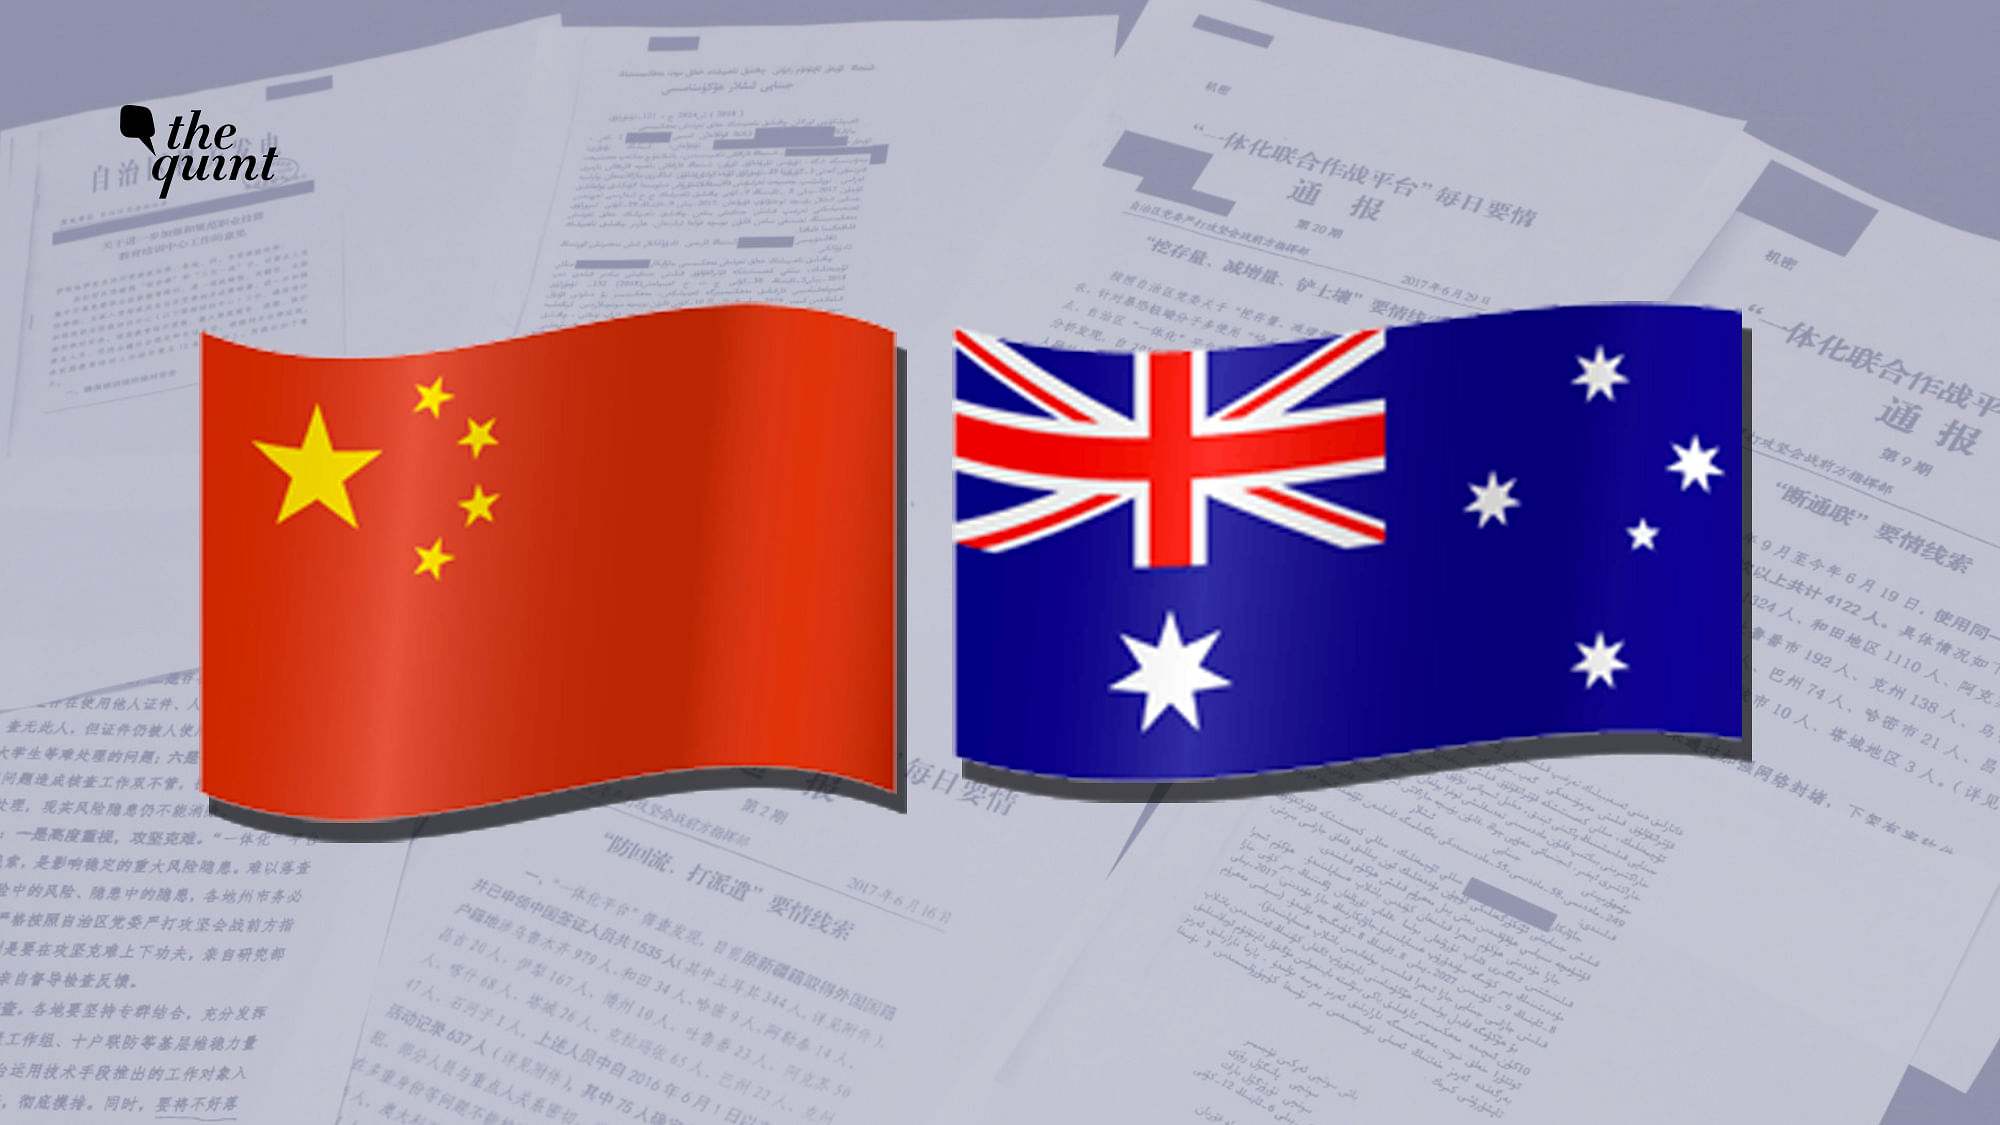  Australian authorities said they are investigating an alleged Chinese plot to install a spy MP in the Canberra Parliament.